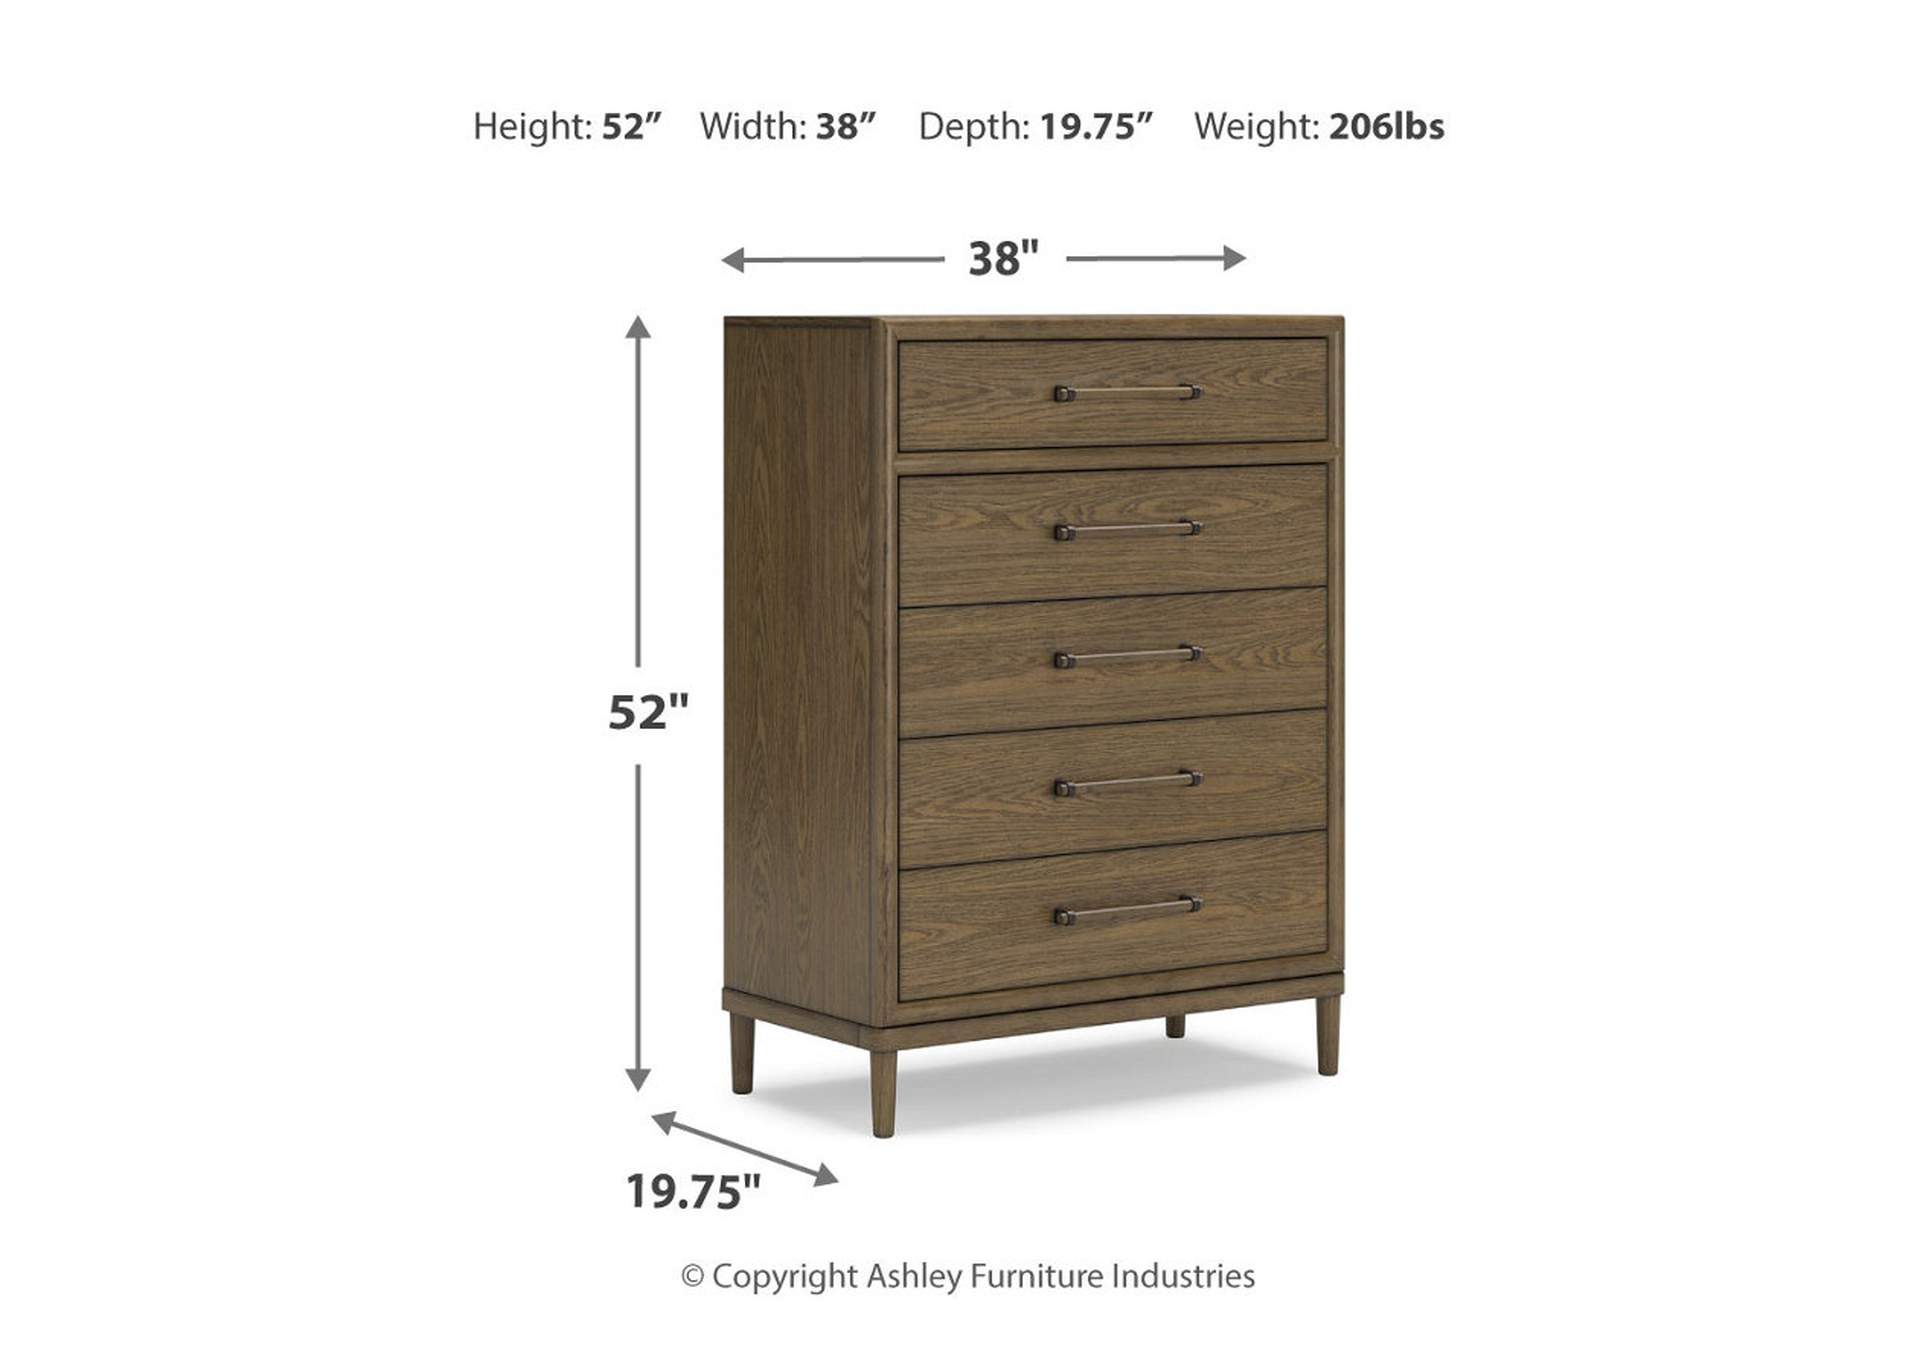 Roanhowe Chest of Drawers,Ashley